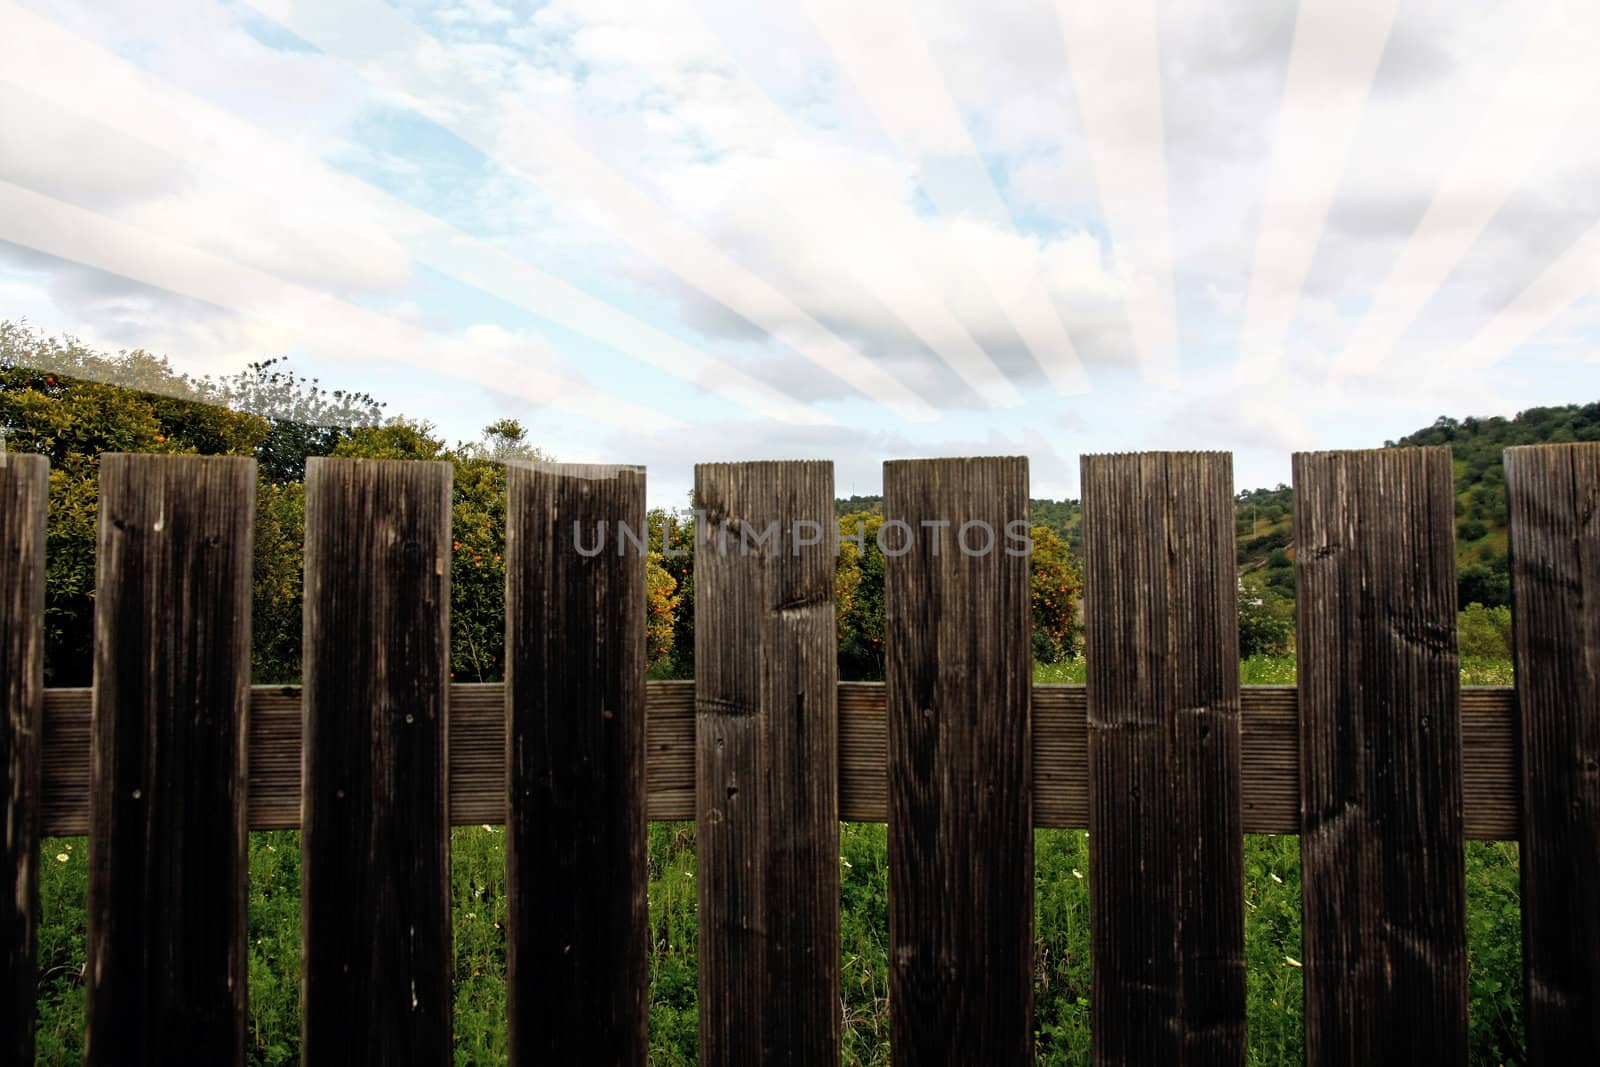 View of a wooden fence separating a orange tree plantation.